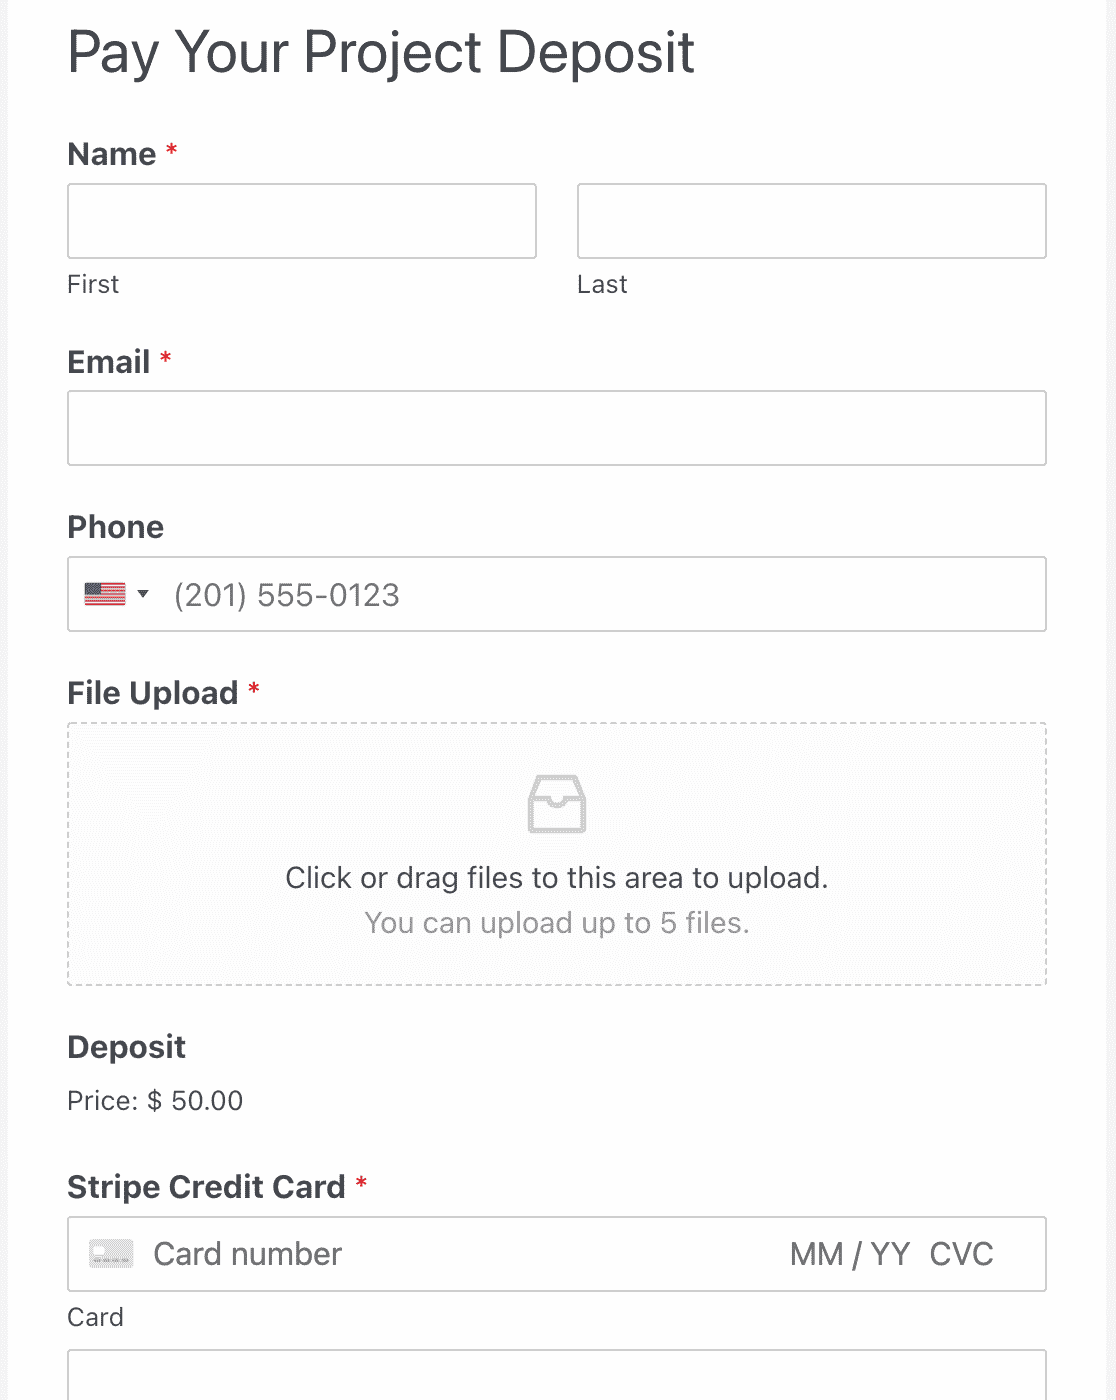 A File Upload form with required payment fields